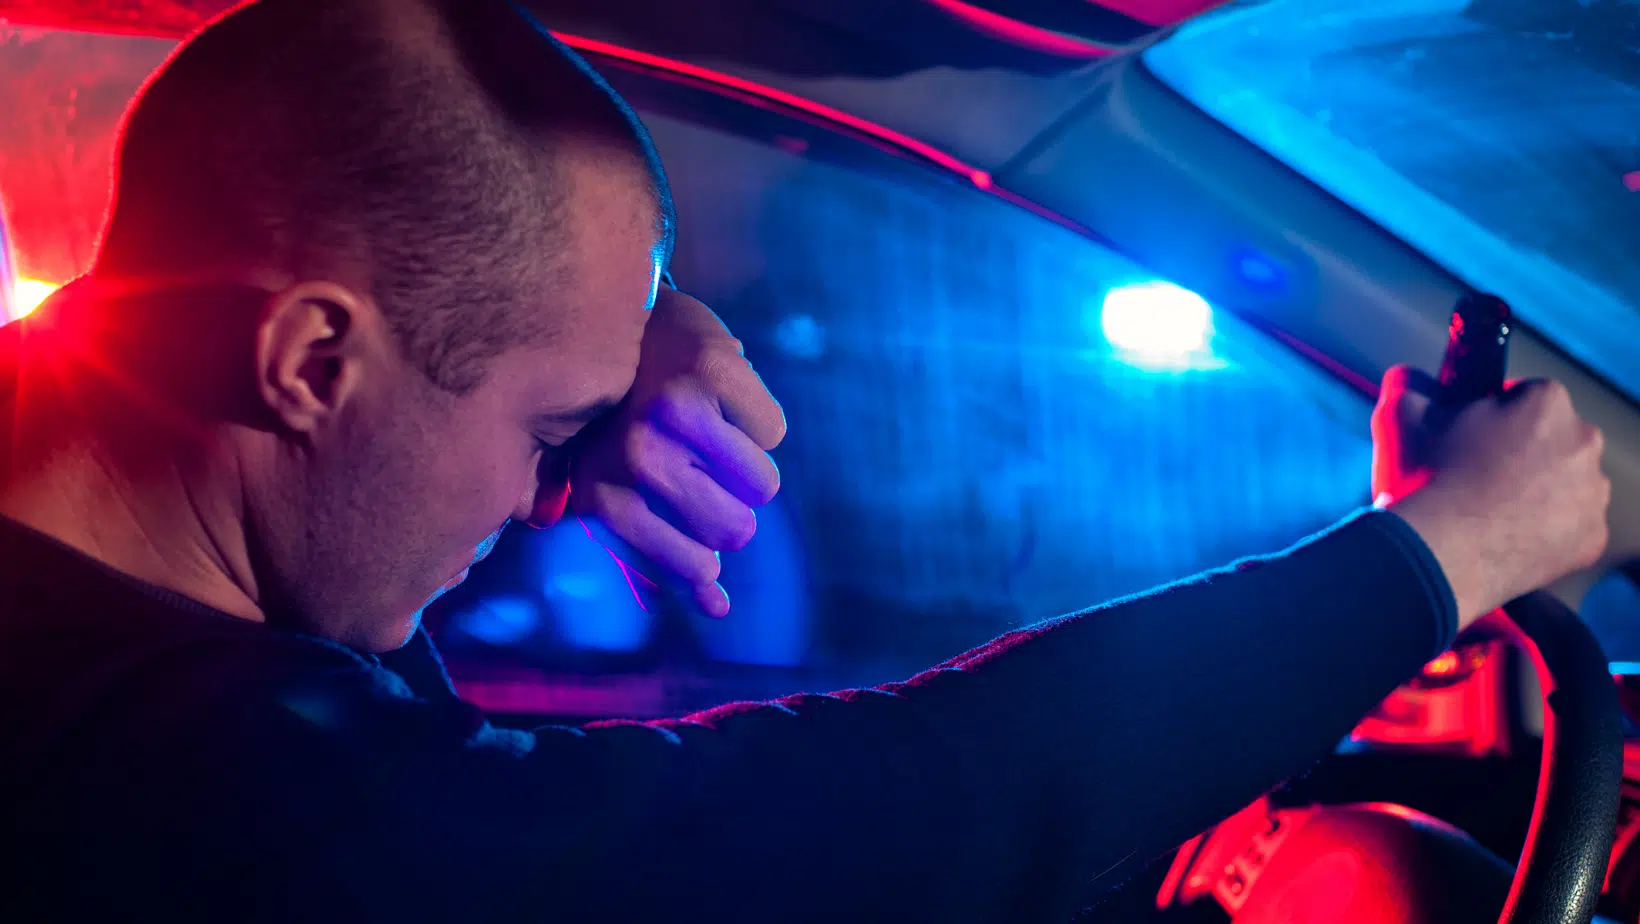 How Many People Were Caught Impaired Driving Over The Holidays?